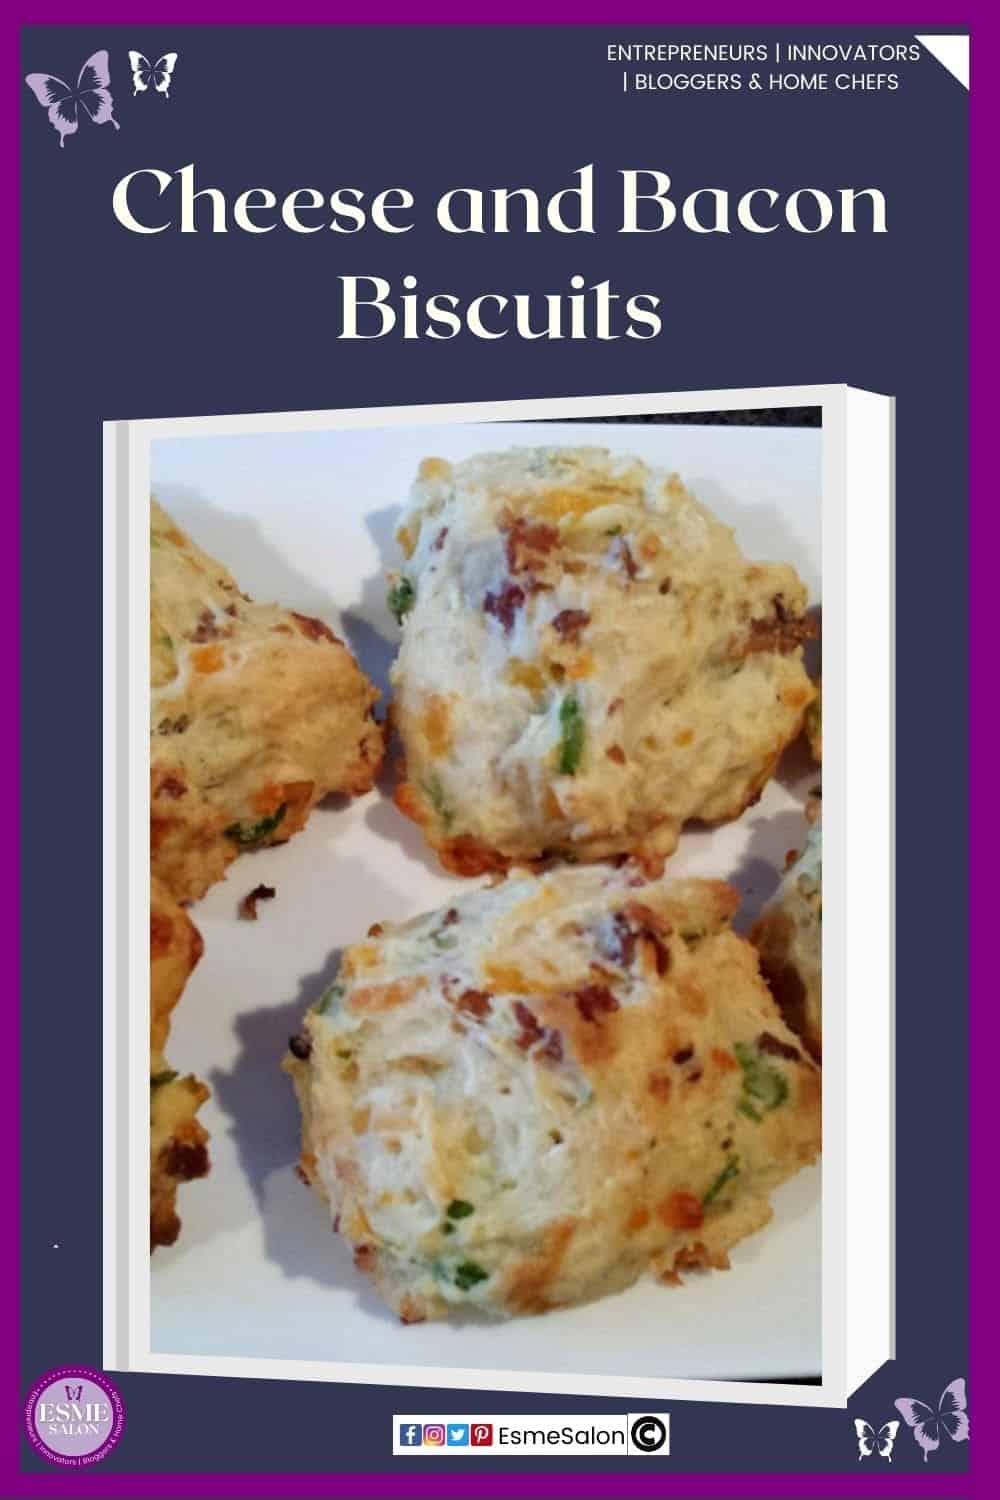 an image of rustic looking Cheese and Bacon Biscuits with chives served on a white oblong platter